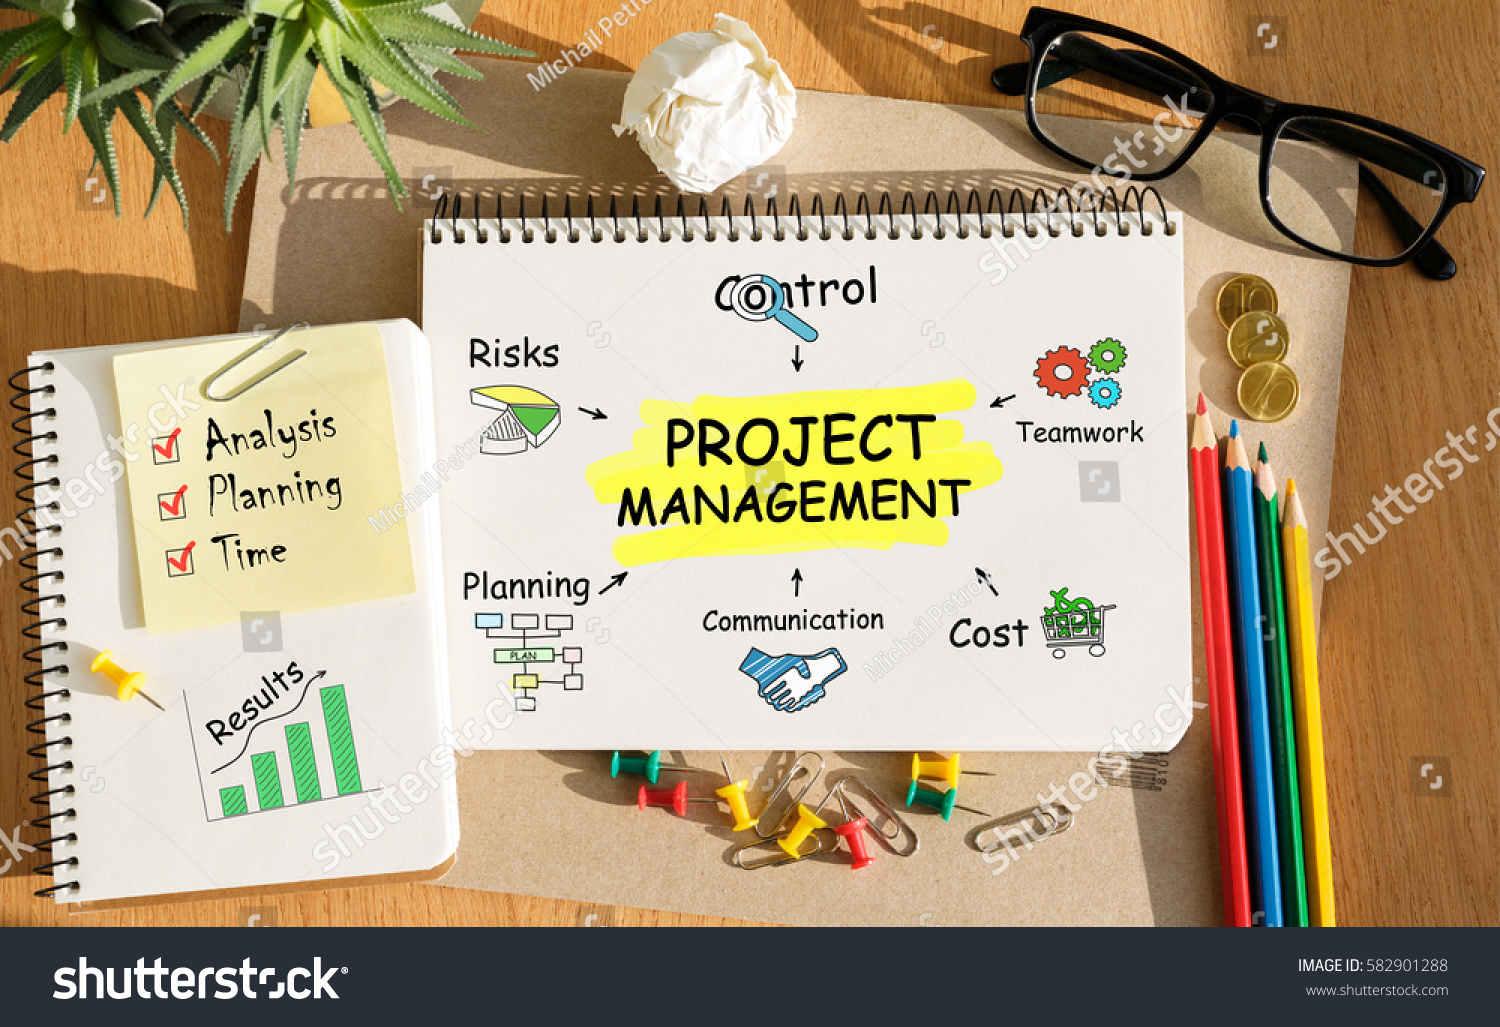 Notebook with Toolls and Notes about Project Management #582901288